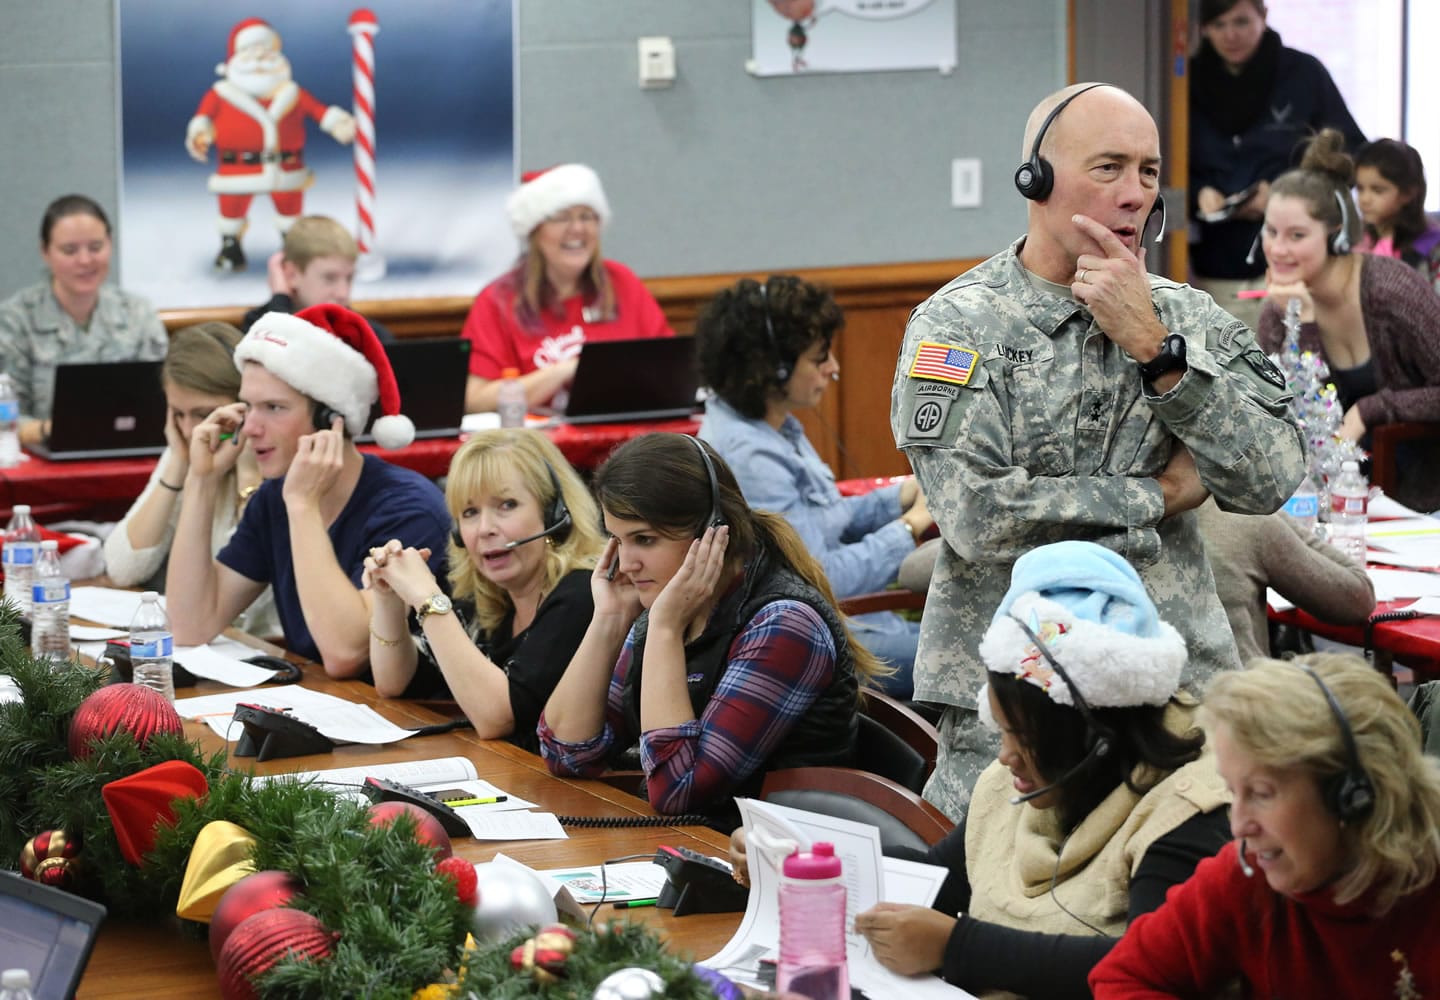 NORAD and U.S. Northern Command (USNORTHCOM) Chief of Staff Maj. Gen. Charles D. Luckey joins other volunteers taking phone calls from children around the world asking where Santa is and when he will deliver presents to their homes, inside a phone-in center during the annual NORAD Tracks Santa Operation, at the North American Aerospace Defense Command, at Peterson Air Force Base, Colo. , in 2014. Hundreds of military and civilian volunteers at NORAD are estimated to field more than 100,000 calls this year through Christmas Eve, from children from all over the world eager to hear about Santa's progress.